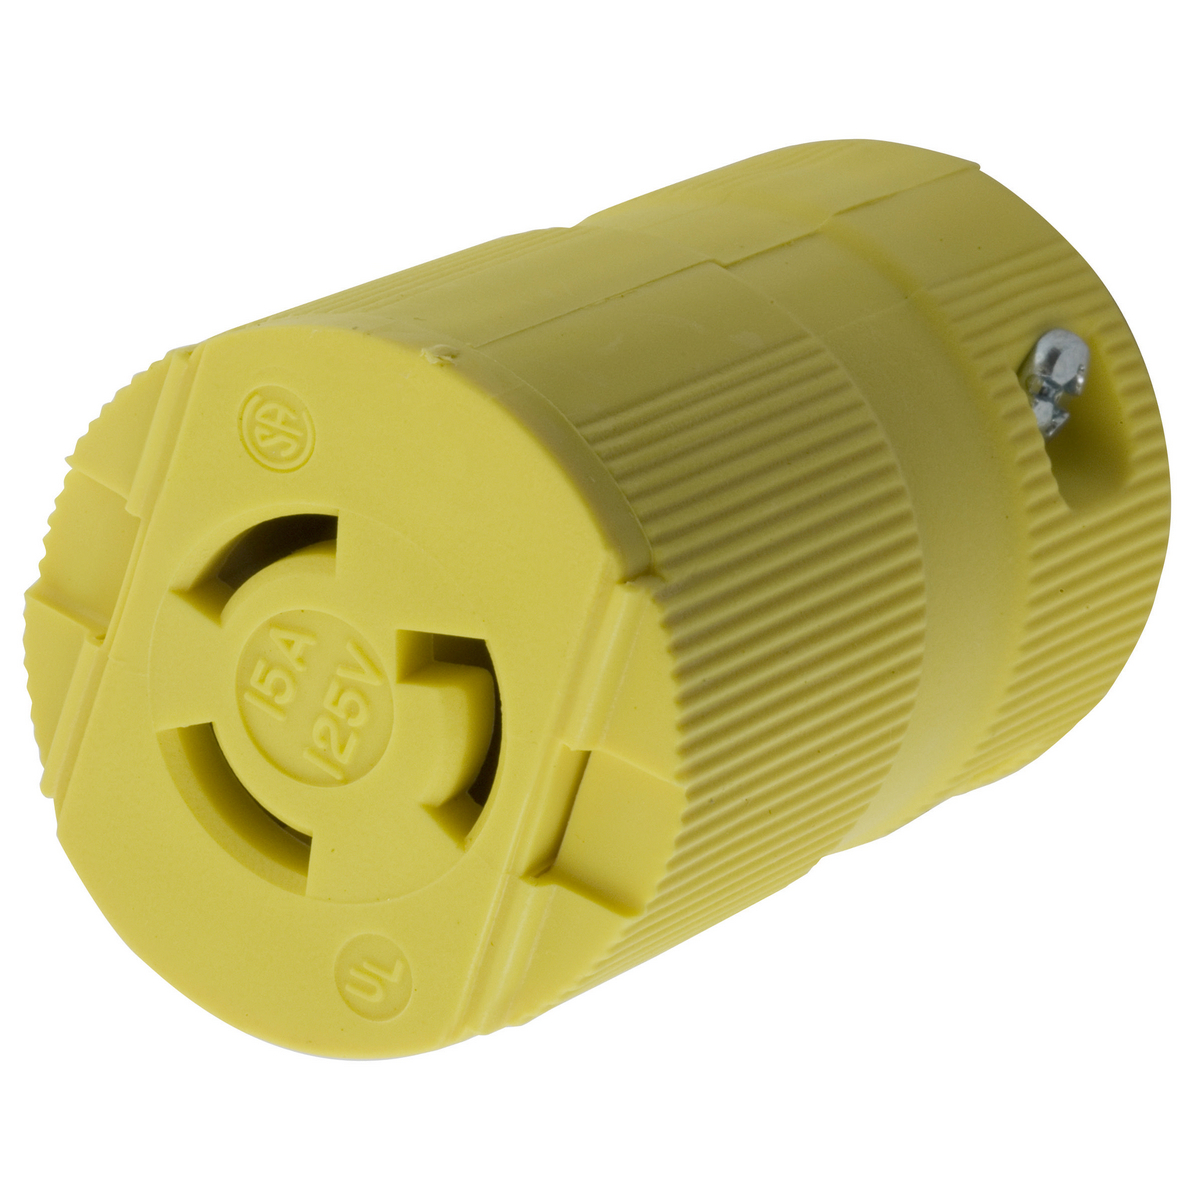 Locking Devices, Twist-Lock®, Valise, Female Connector Body, 15A 125V,  2-Pole 3-Wire Grounding, L5-15R, Screw Terminal, Yellow, HBL4729VY